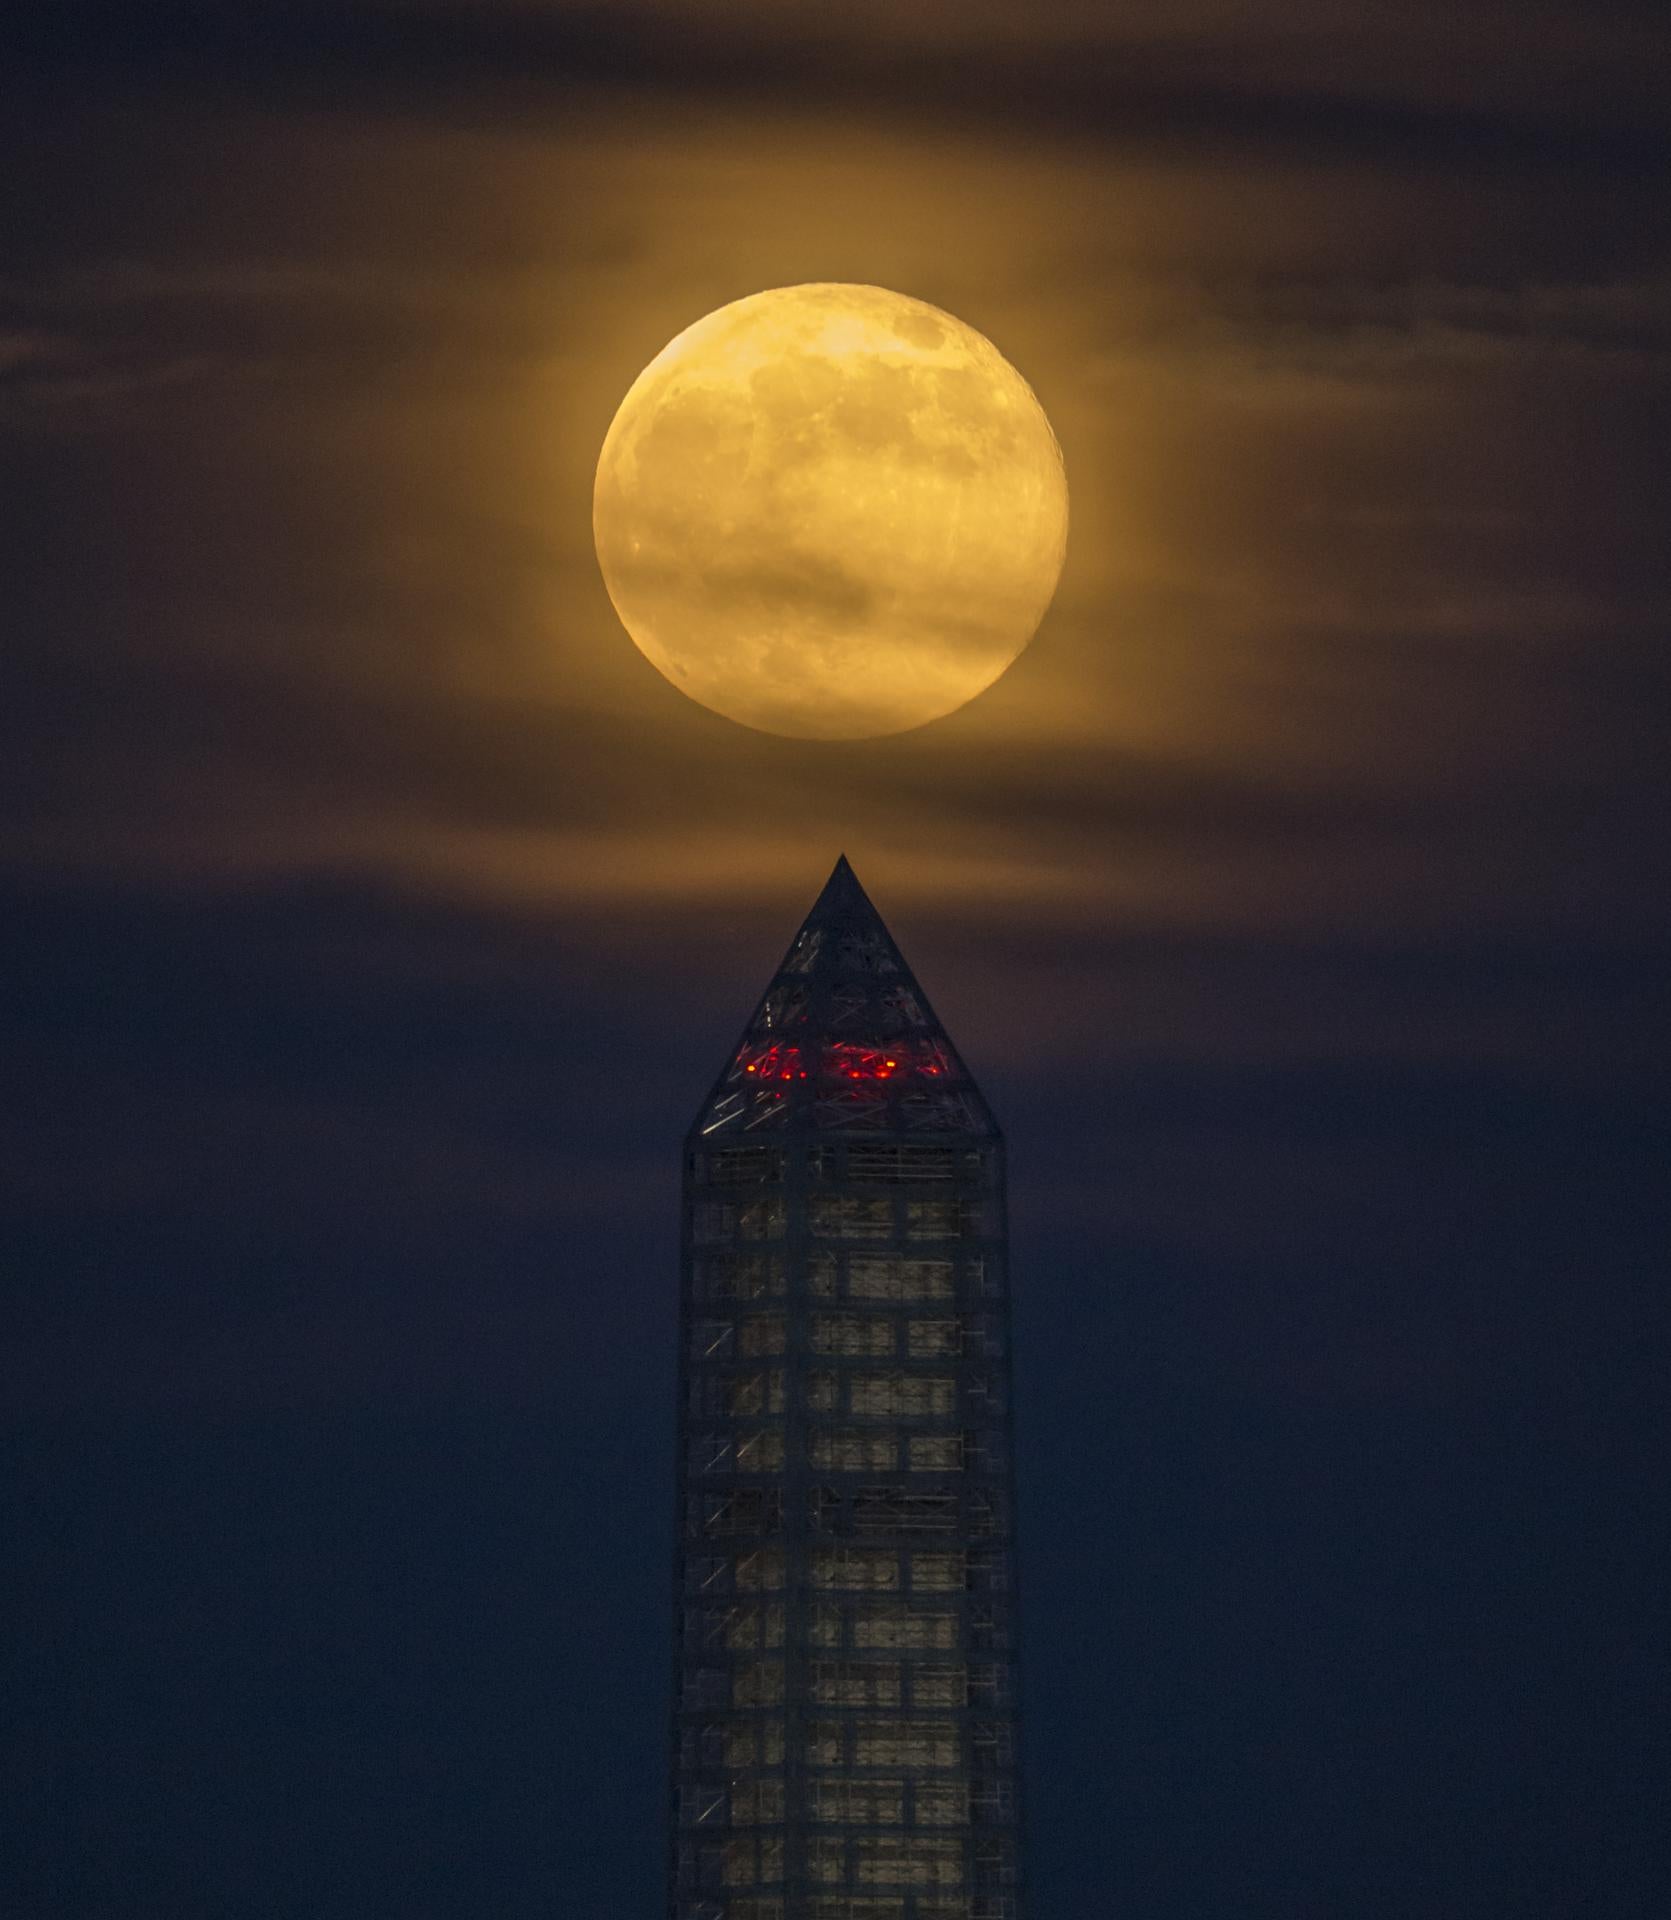 A Super Strawberry Moon seen above the Washington Monument in Washington, D.C. in 2013